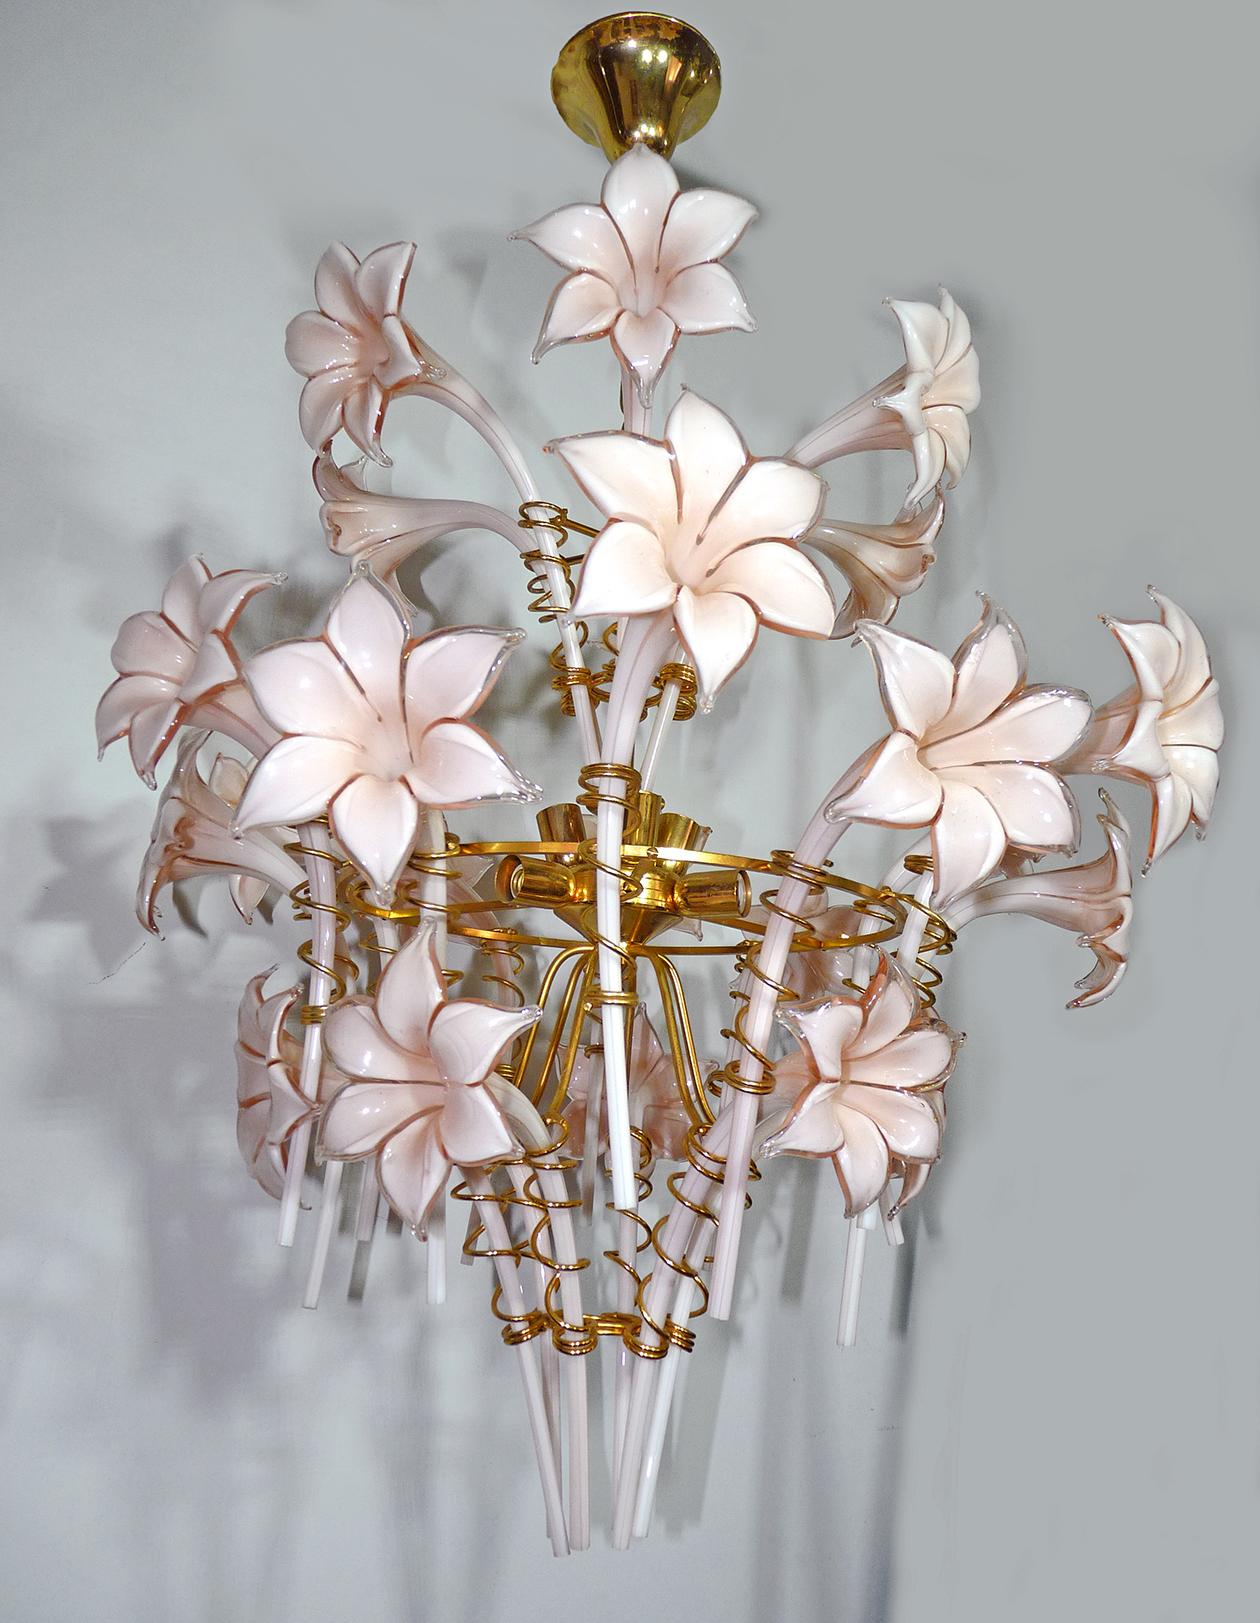 Awesome large 1970s vintage Murano glass Floral Franco Luce Seguso gilt chandelier. Having a  gold-plated brass frame, it's spherical center holds twenty-four hand blown blooms in the form of lilies.

Measures:
Diameter 23.6 in/ 60 cm
Height 37.4